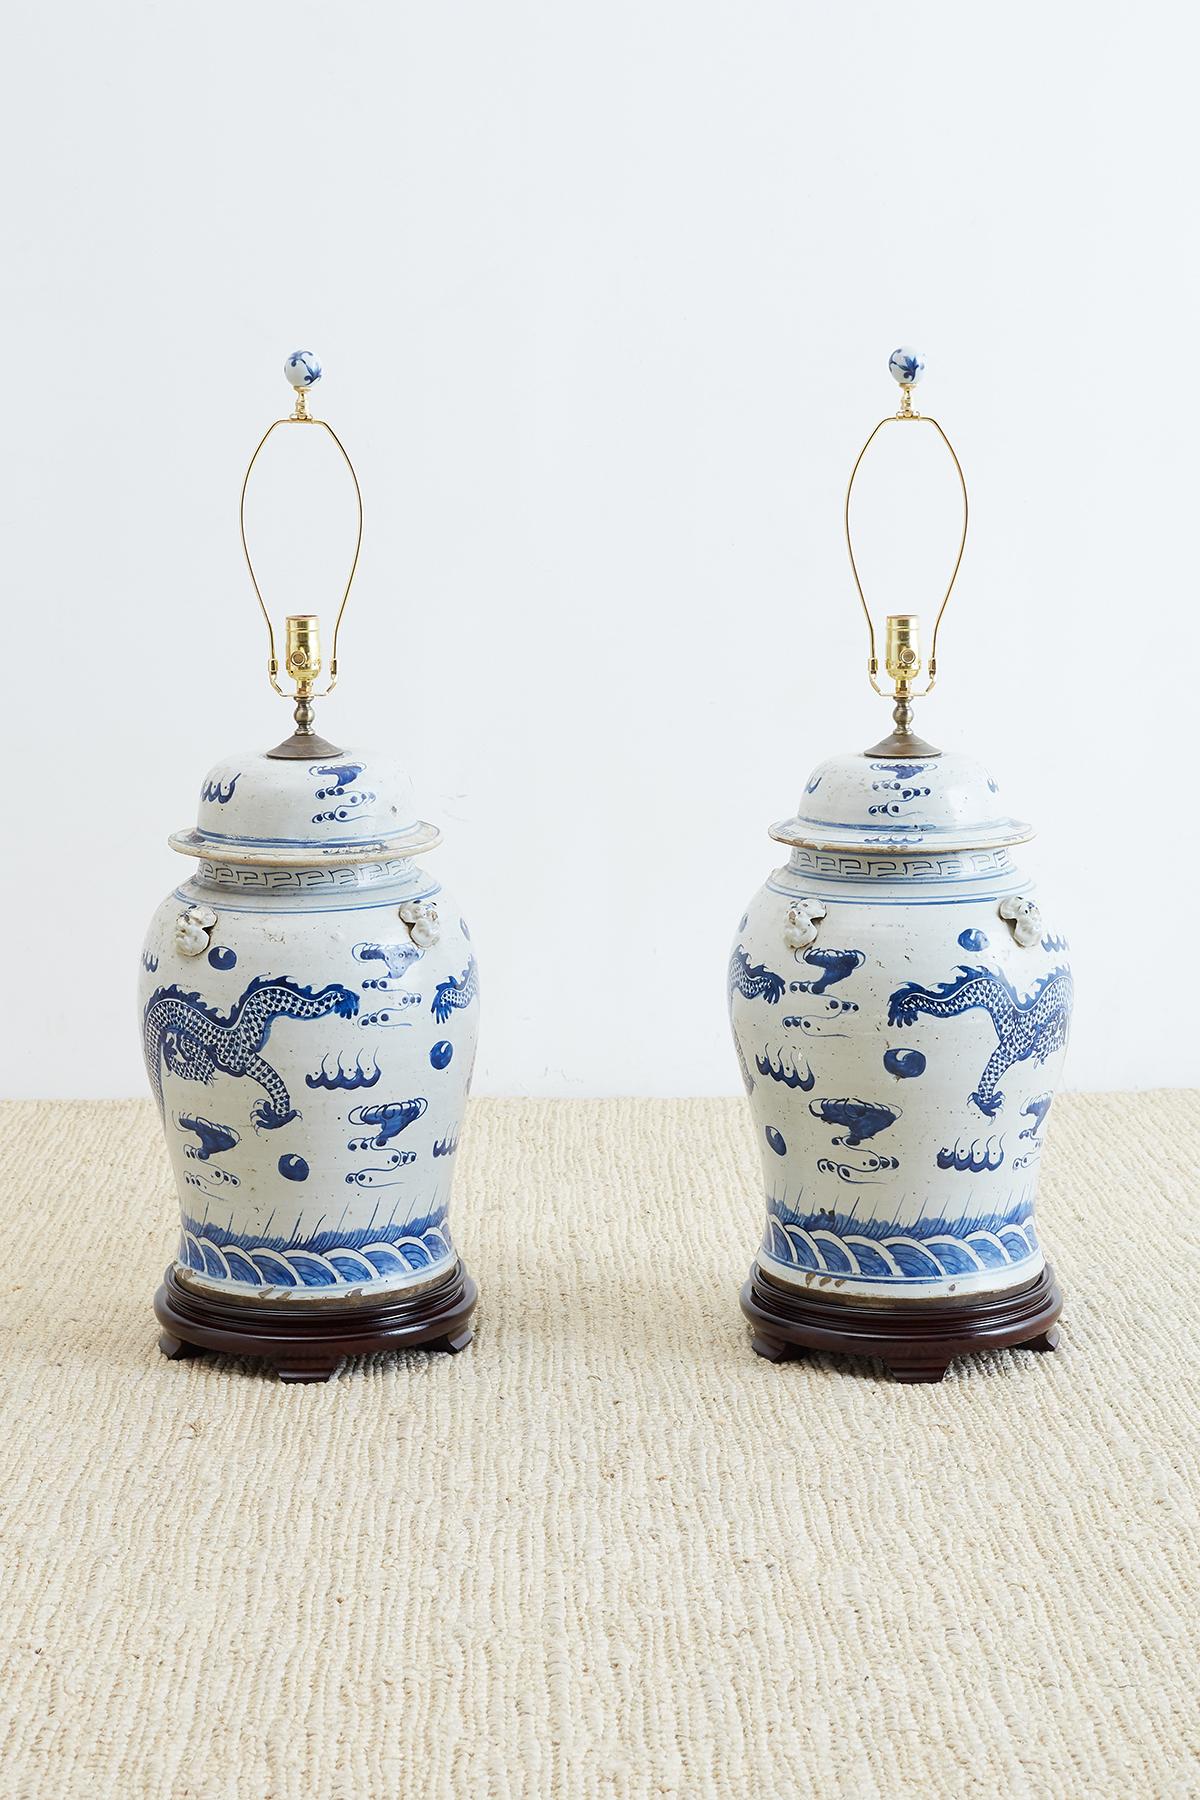 Fantastic pair of monumental Chinese blue and white ginger jars converted to table lamps. Hand-painted with dragons in the clouds over a sea of waves. Mythical beast heads adorn the shoulders on each side. Mounted to wooden plinths with shaped feet.